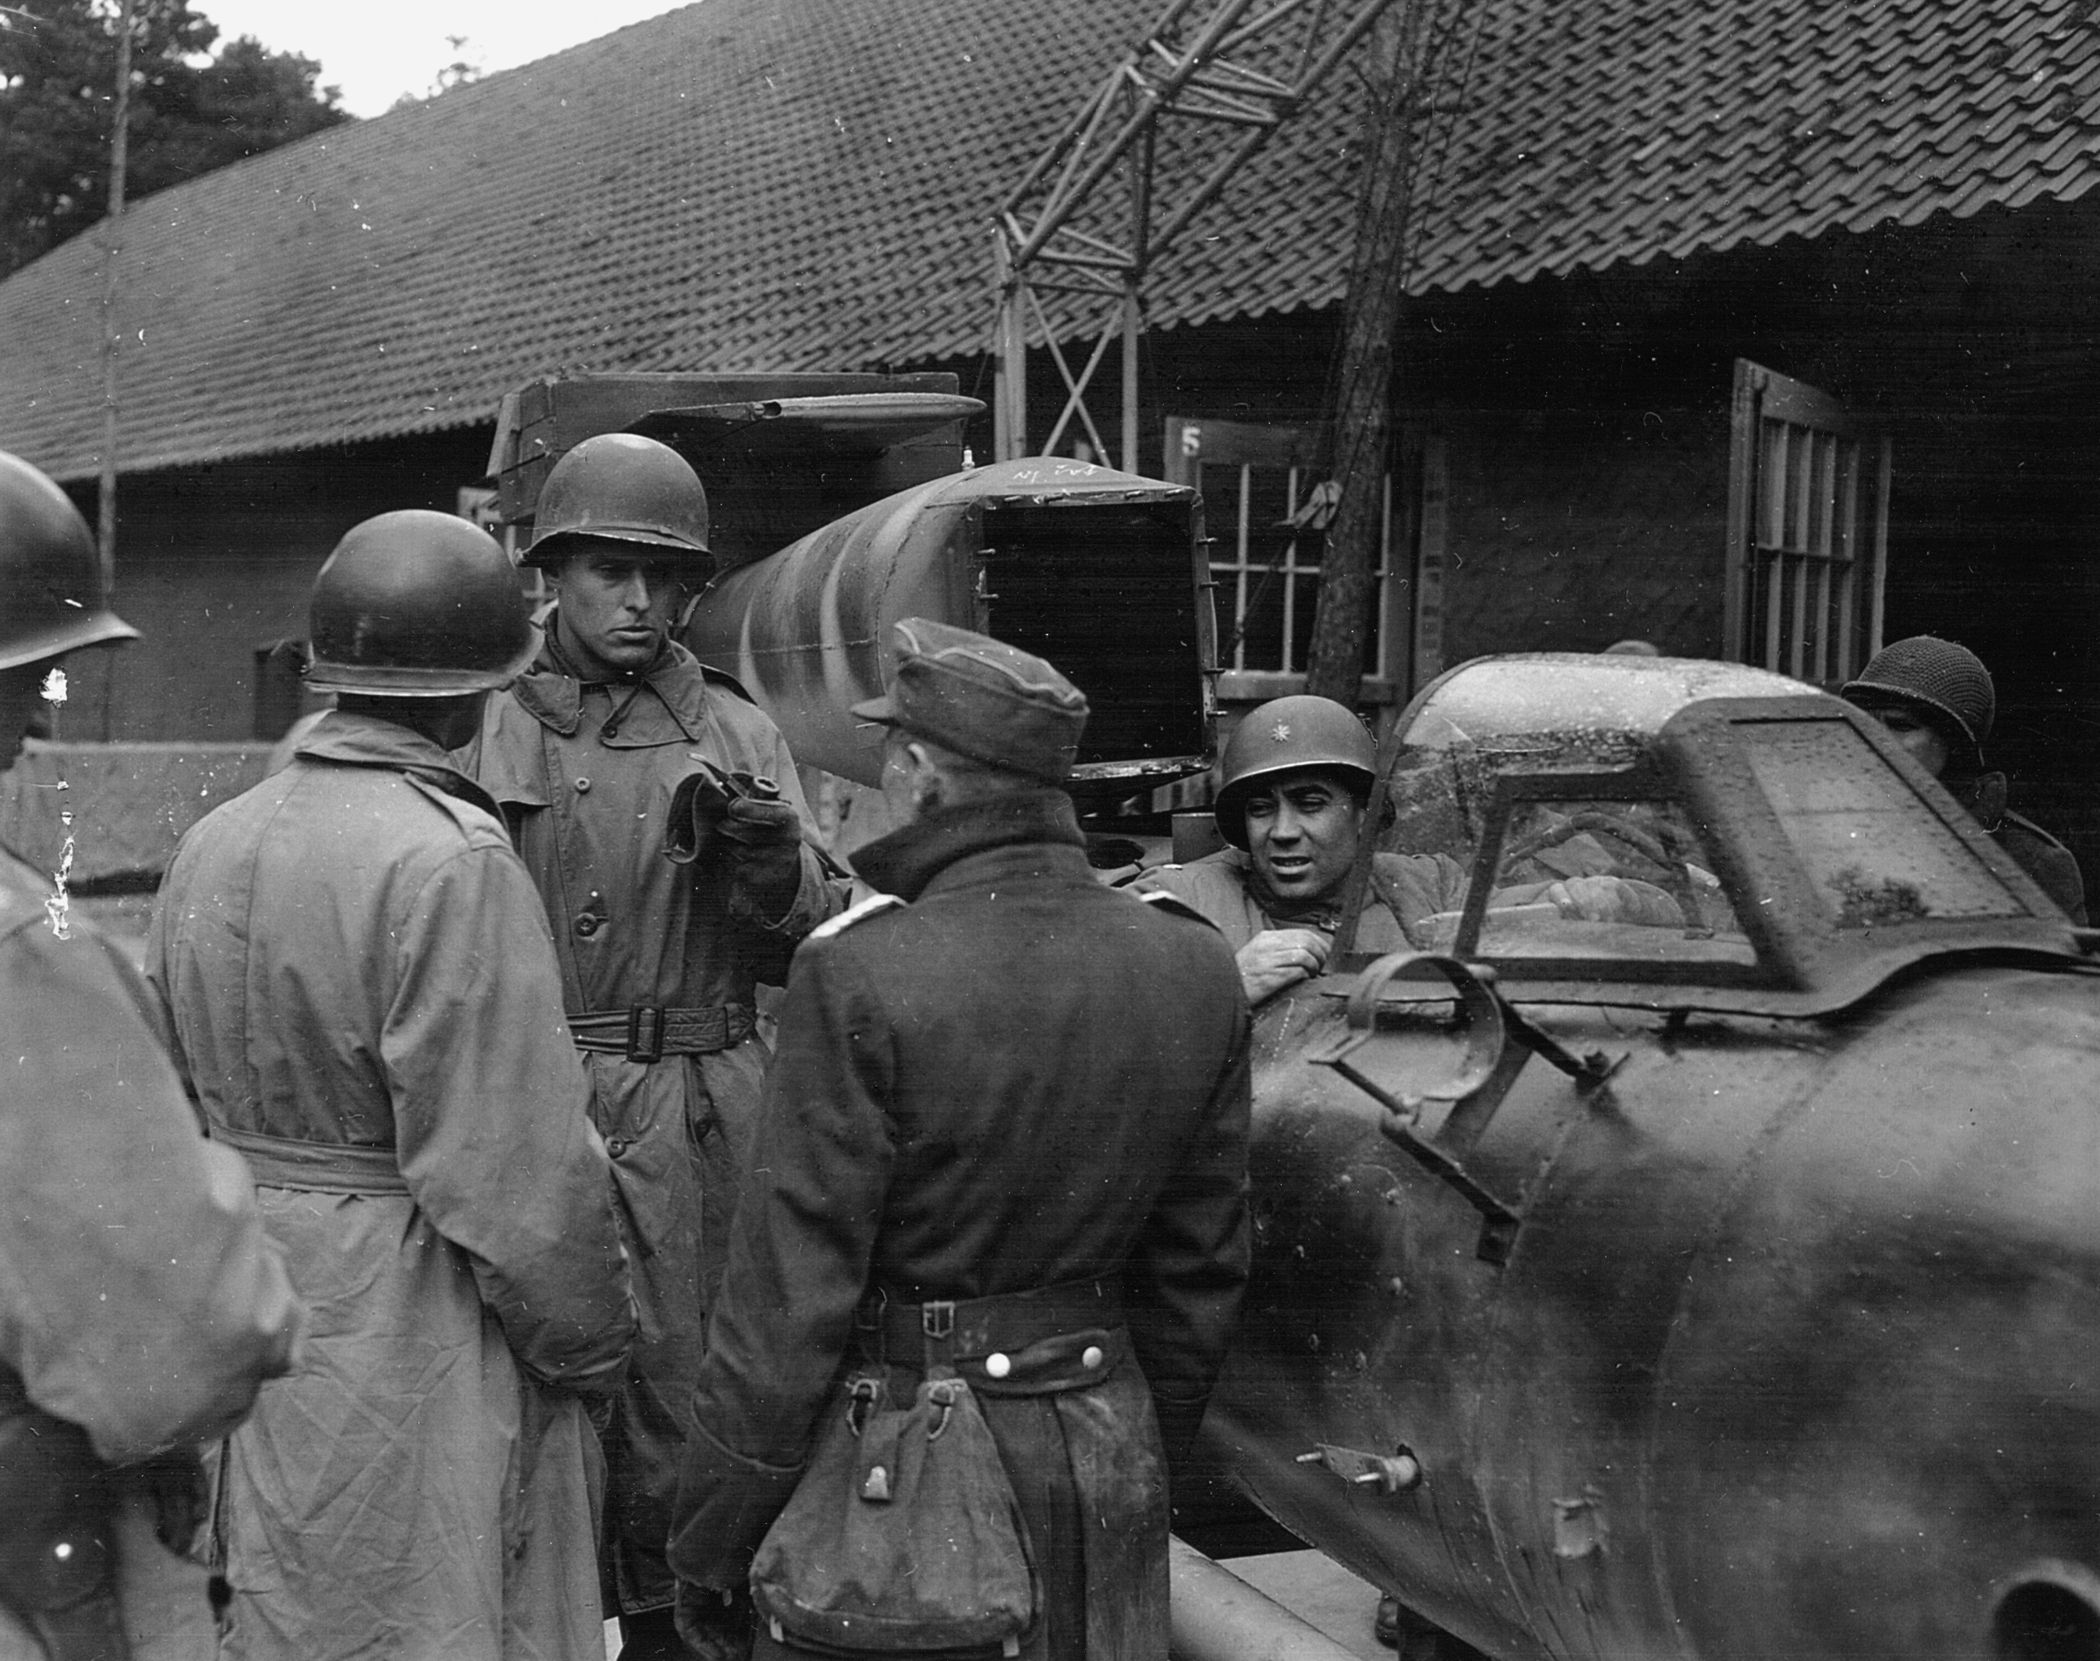 Soldiers of the 5th Armored Division examine a German V-1 suicide bomb.